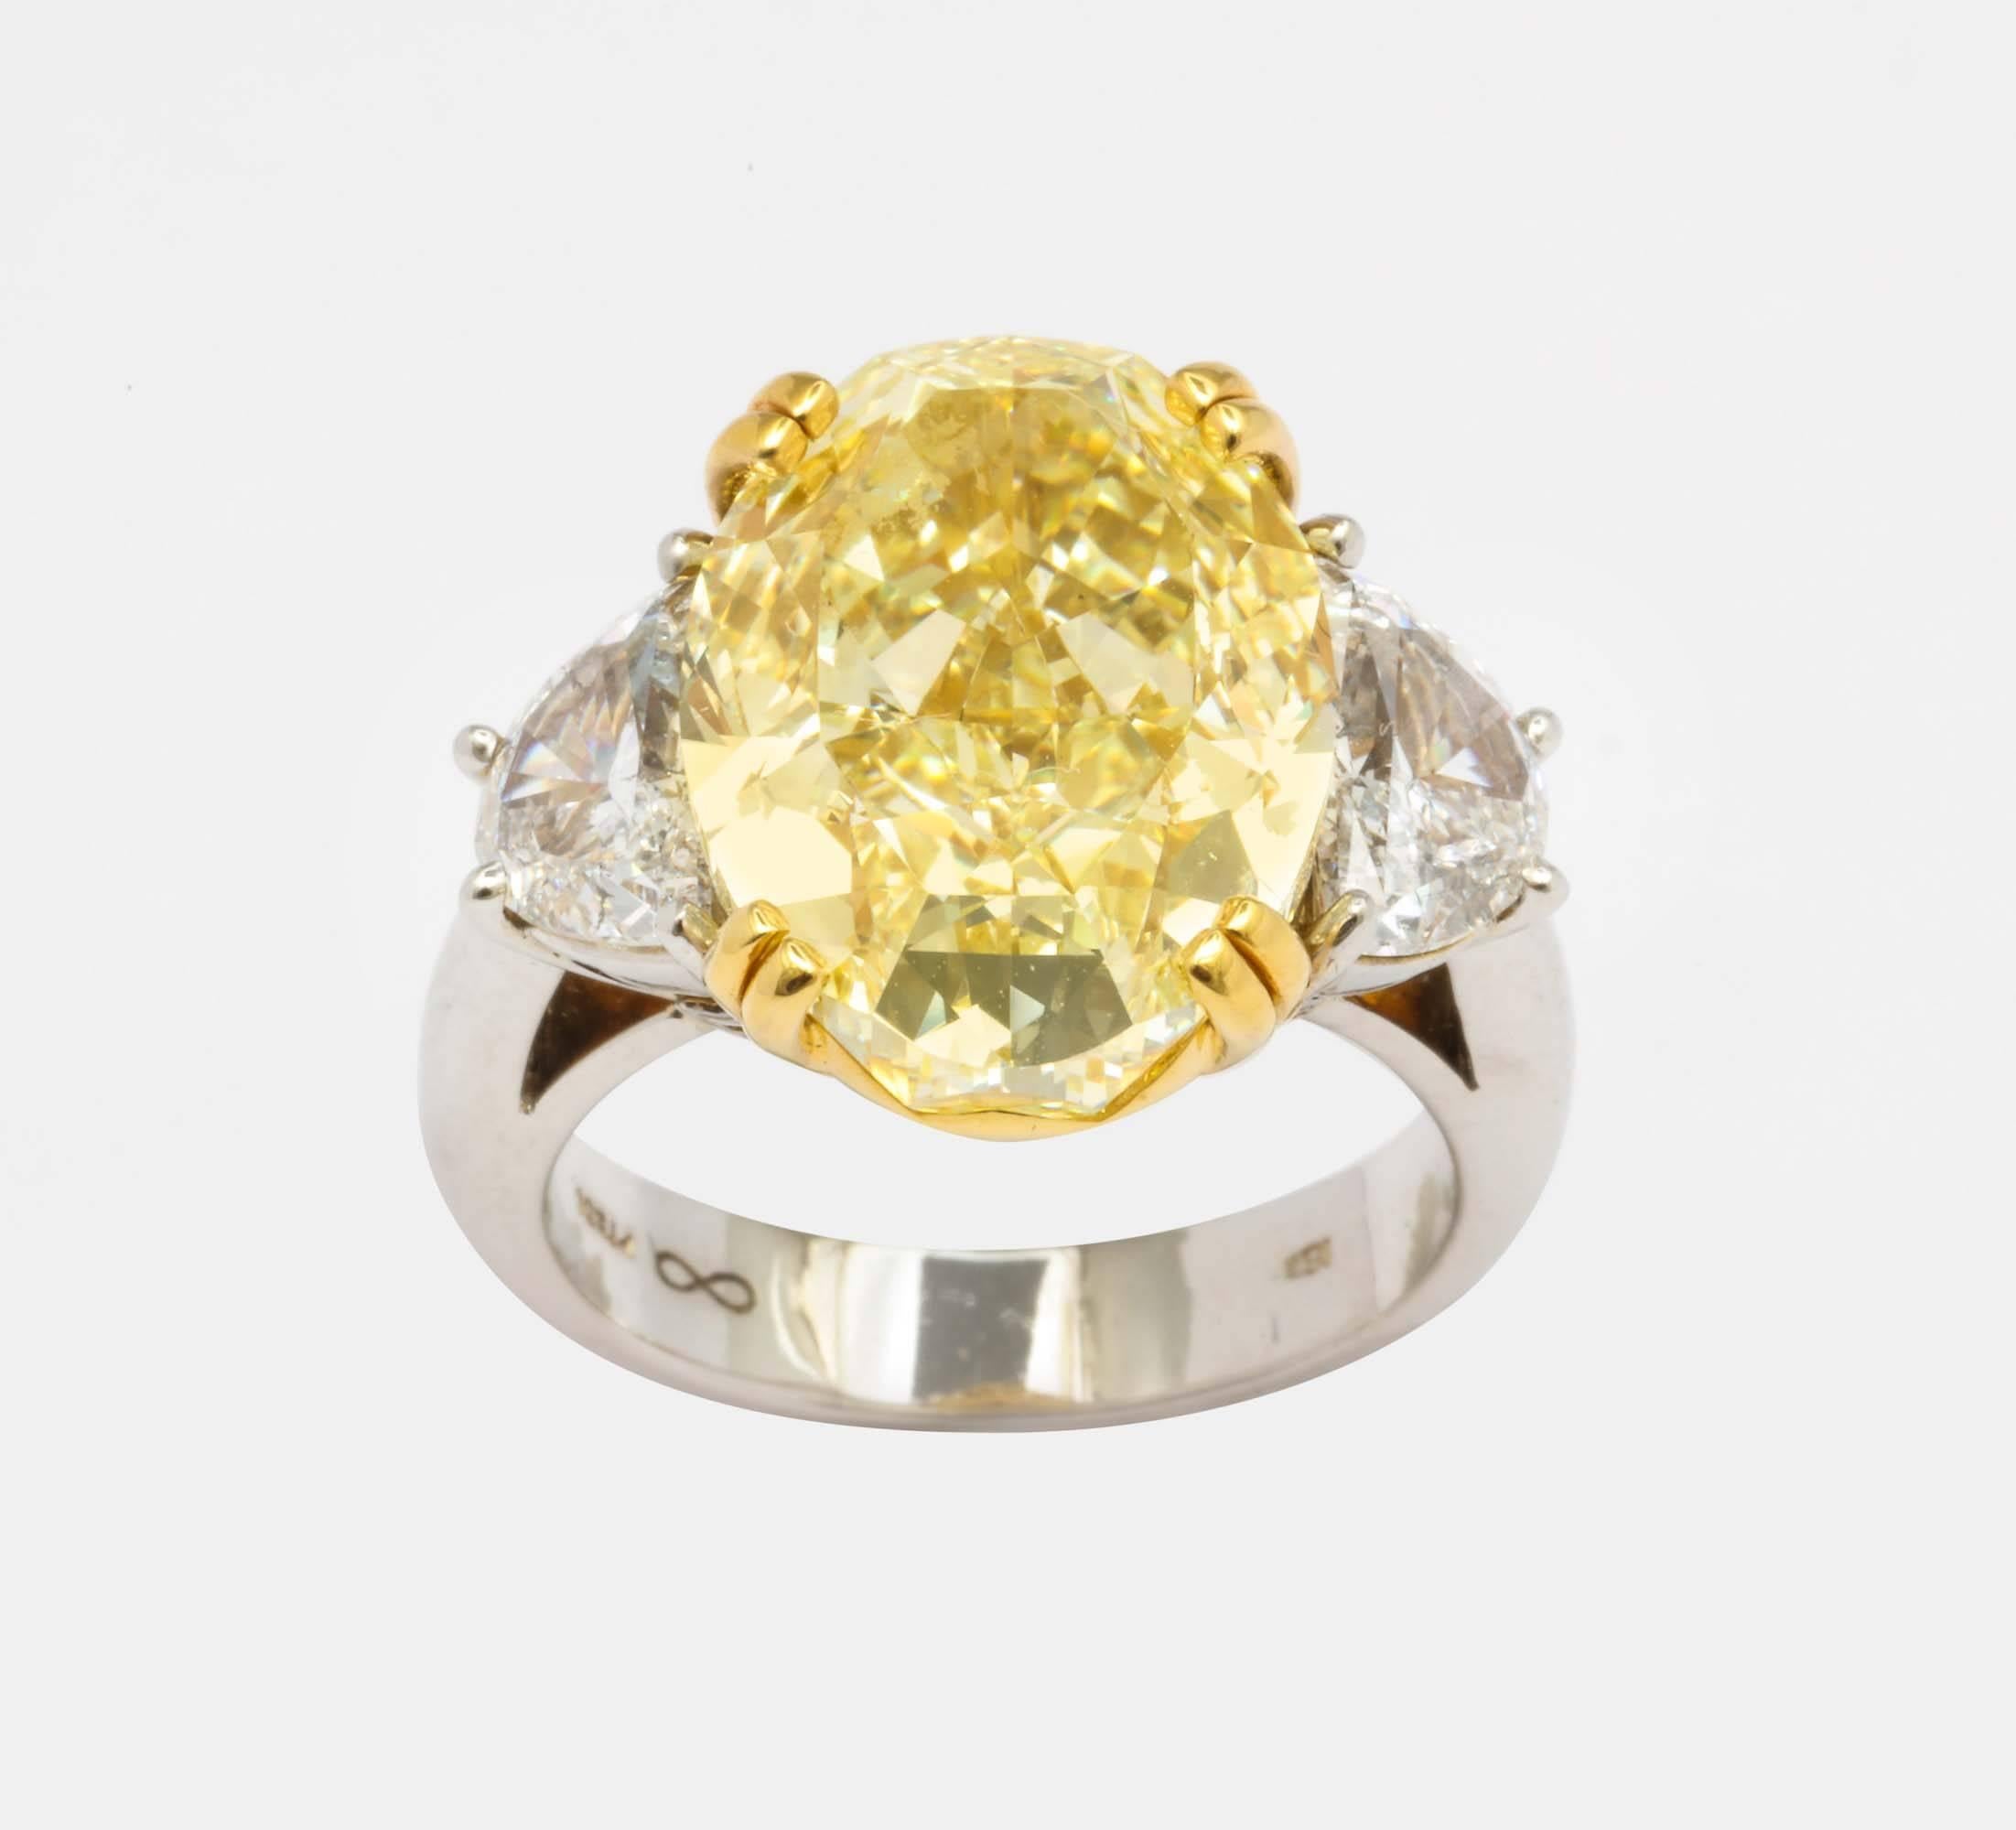 Oval Brilliant Cut diamond 10.02 carats
GIA Color Rating: Fancy Yellow
GIA Clarity rating: SI1
Modern Cut
Flanked by 2 Half moon shaped diamonds approx 2.00 carats
GIA report # 14613959 on request